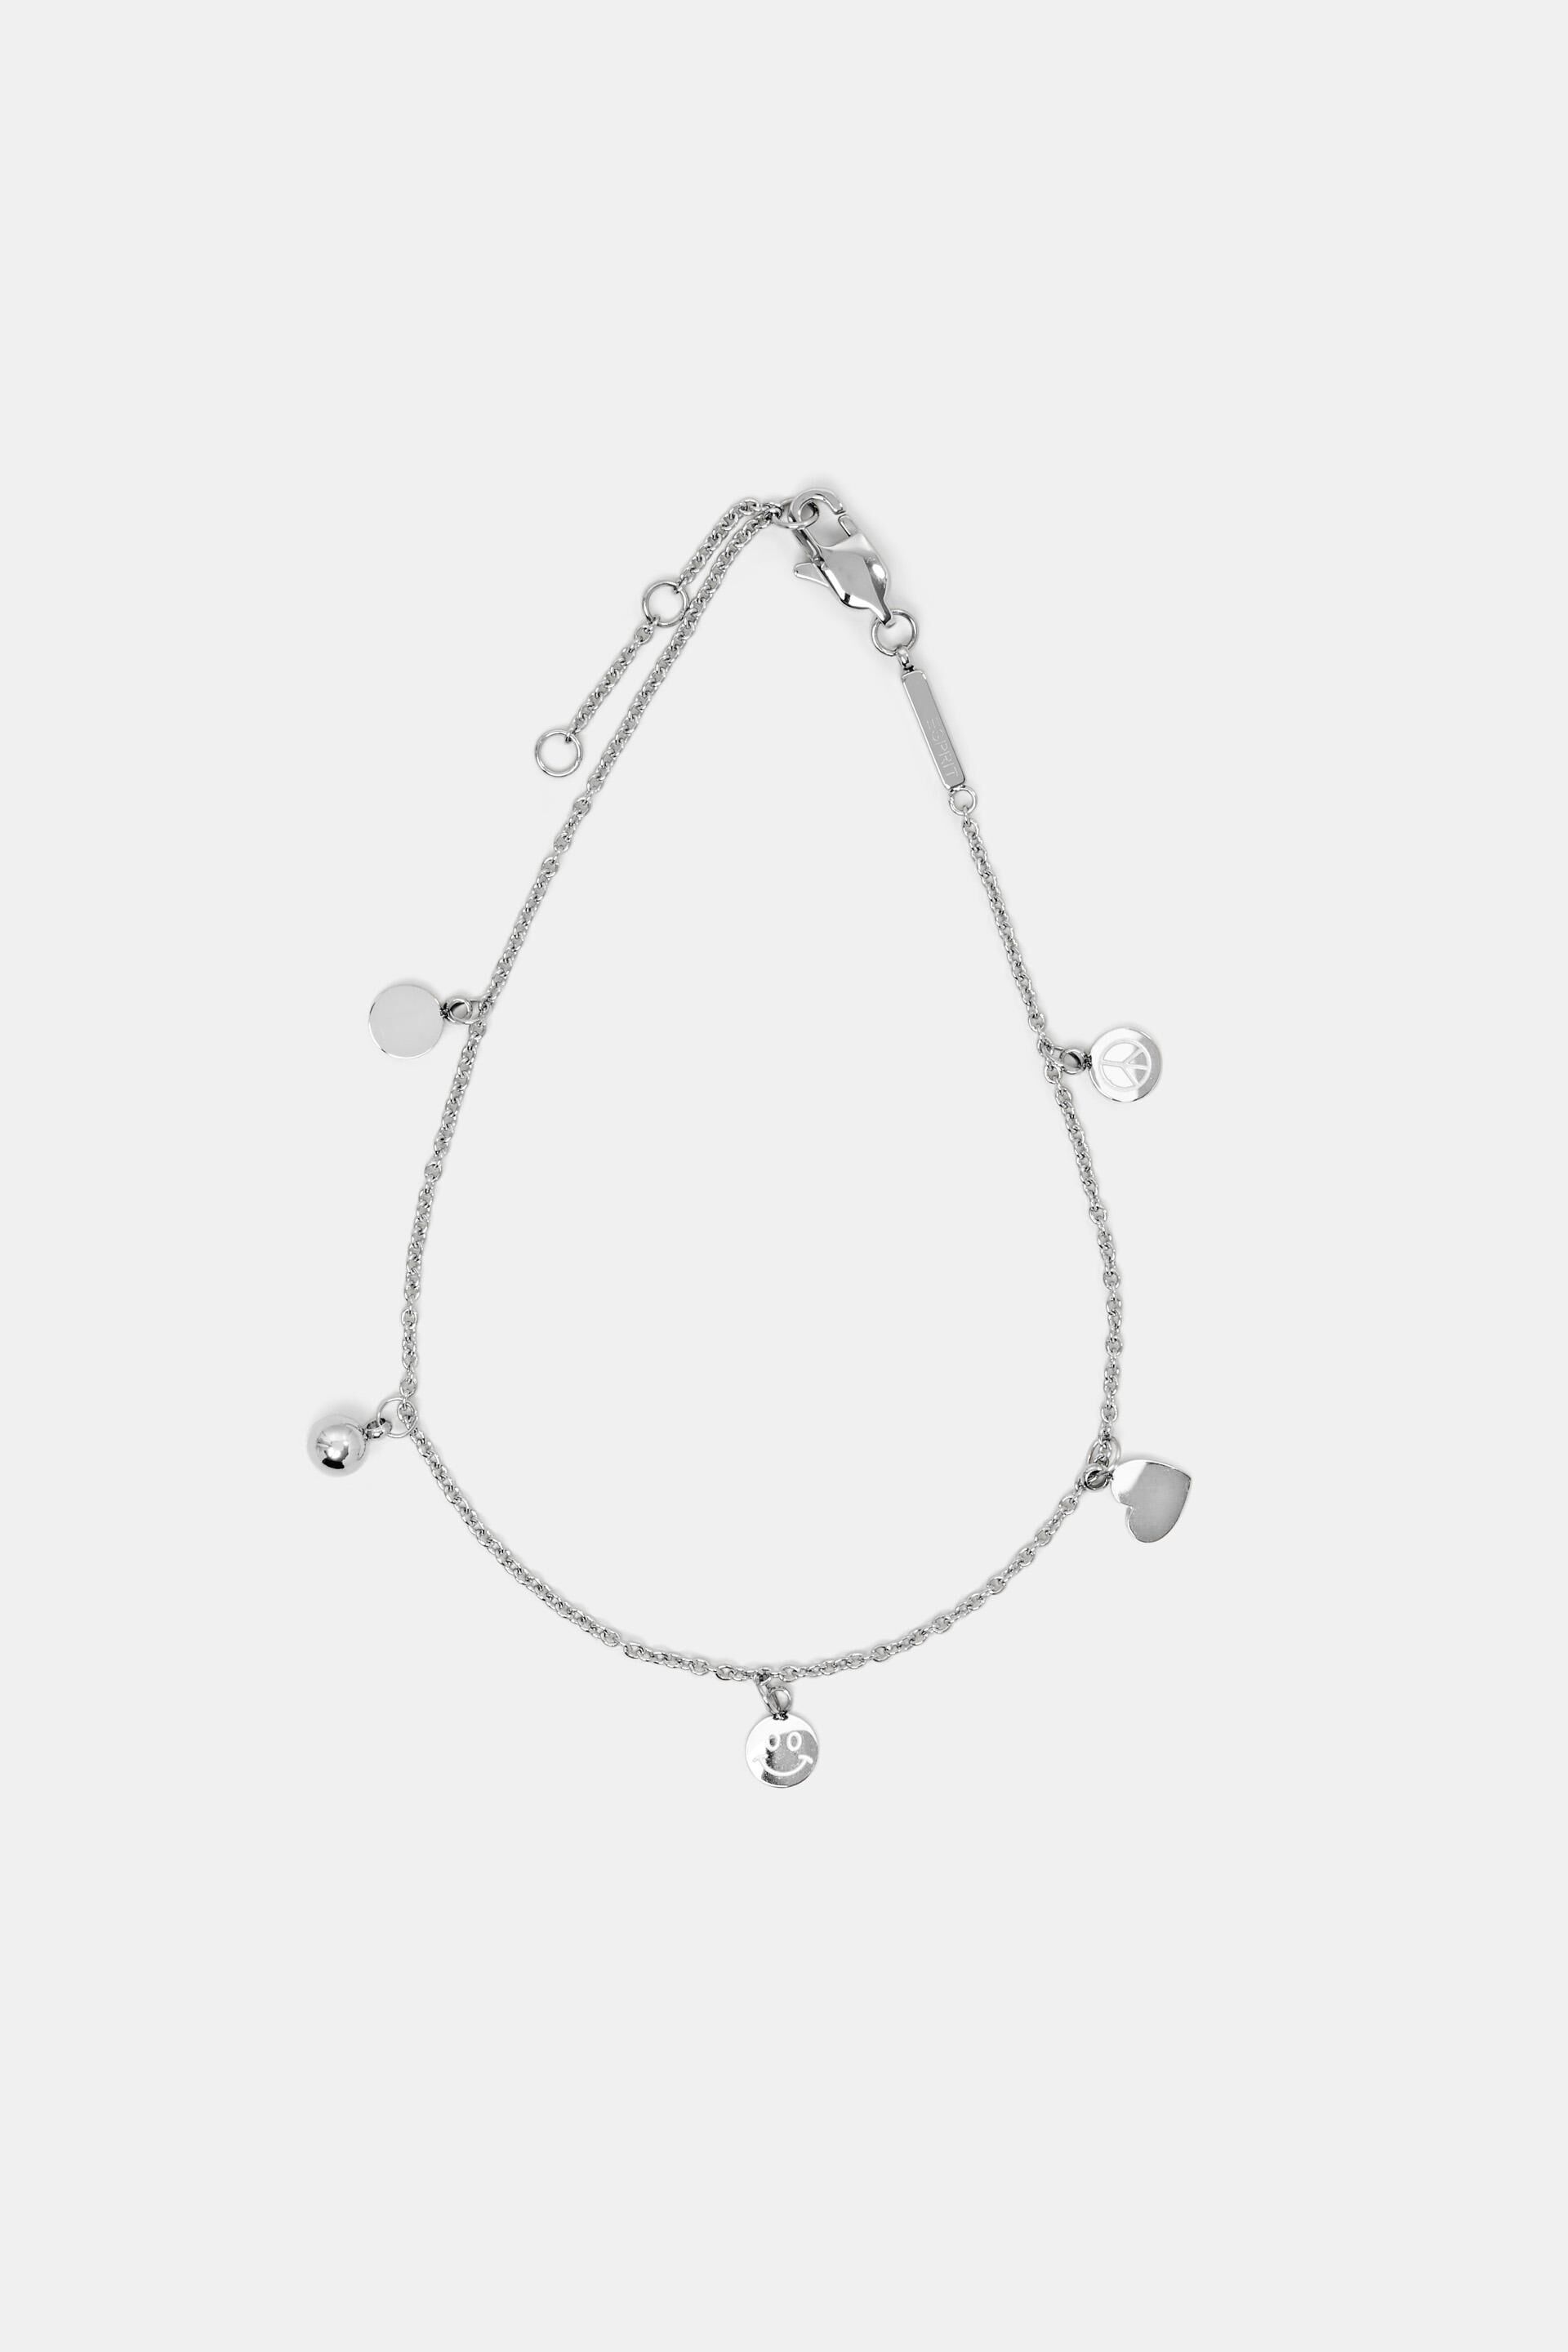 Esprit Online Store Lucky charms anklet, stainless steel